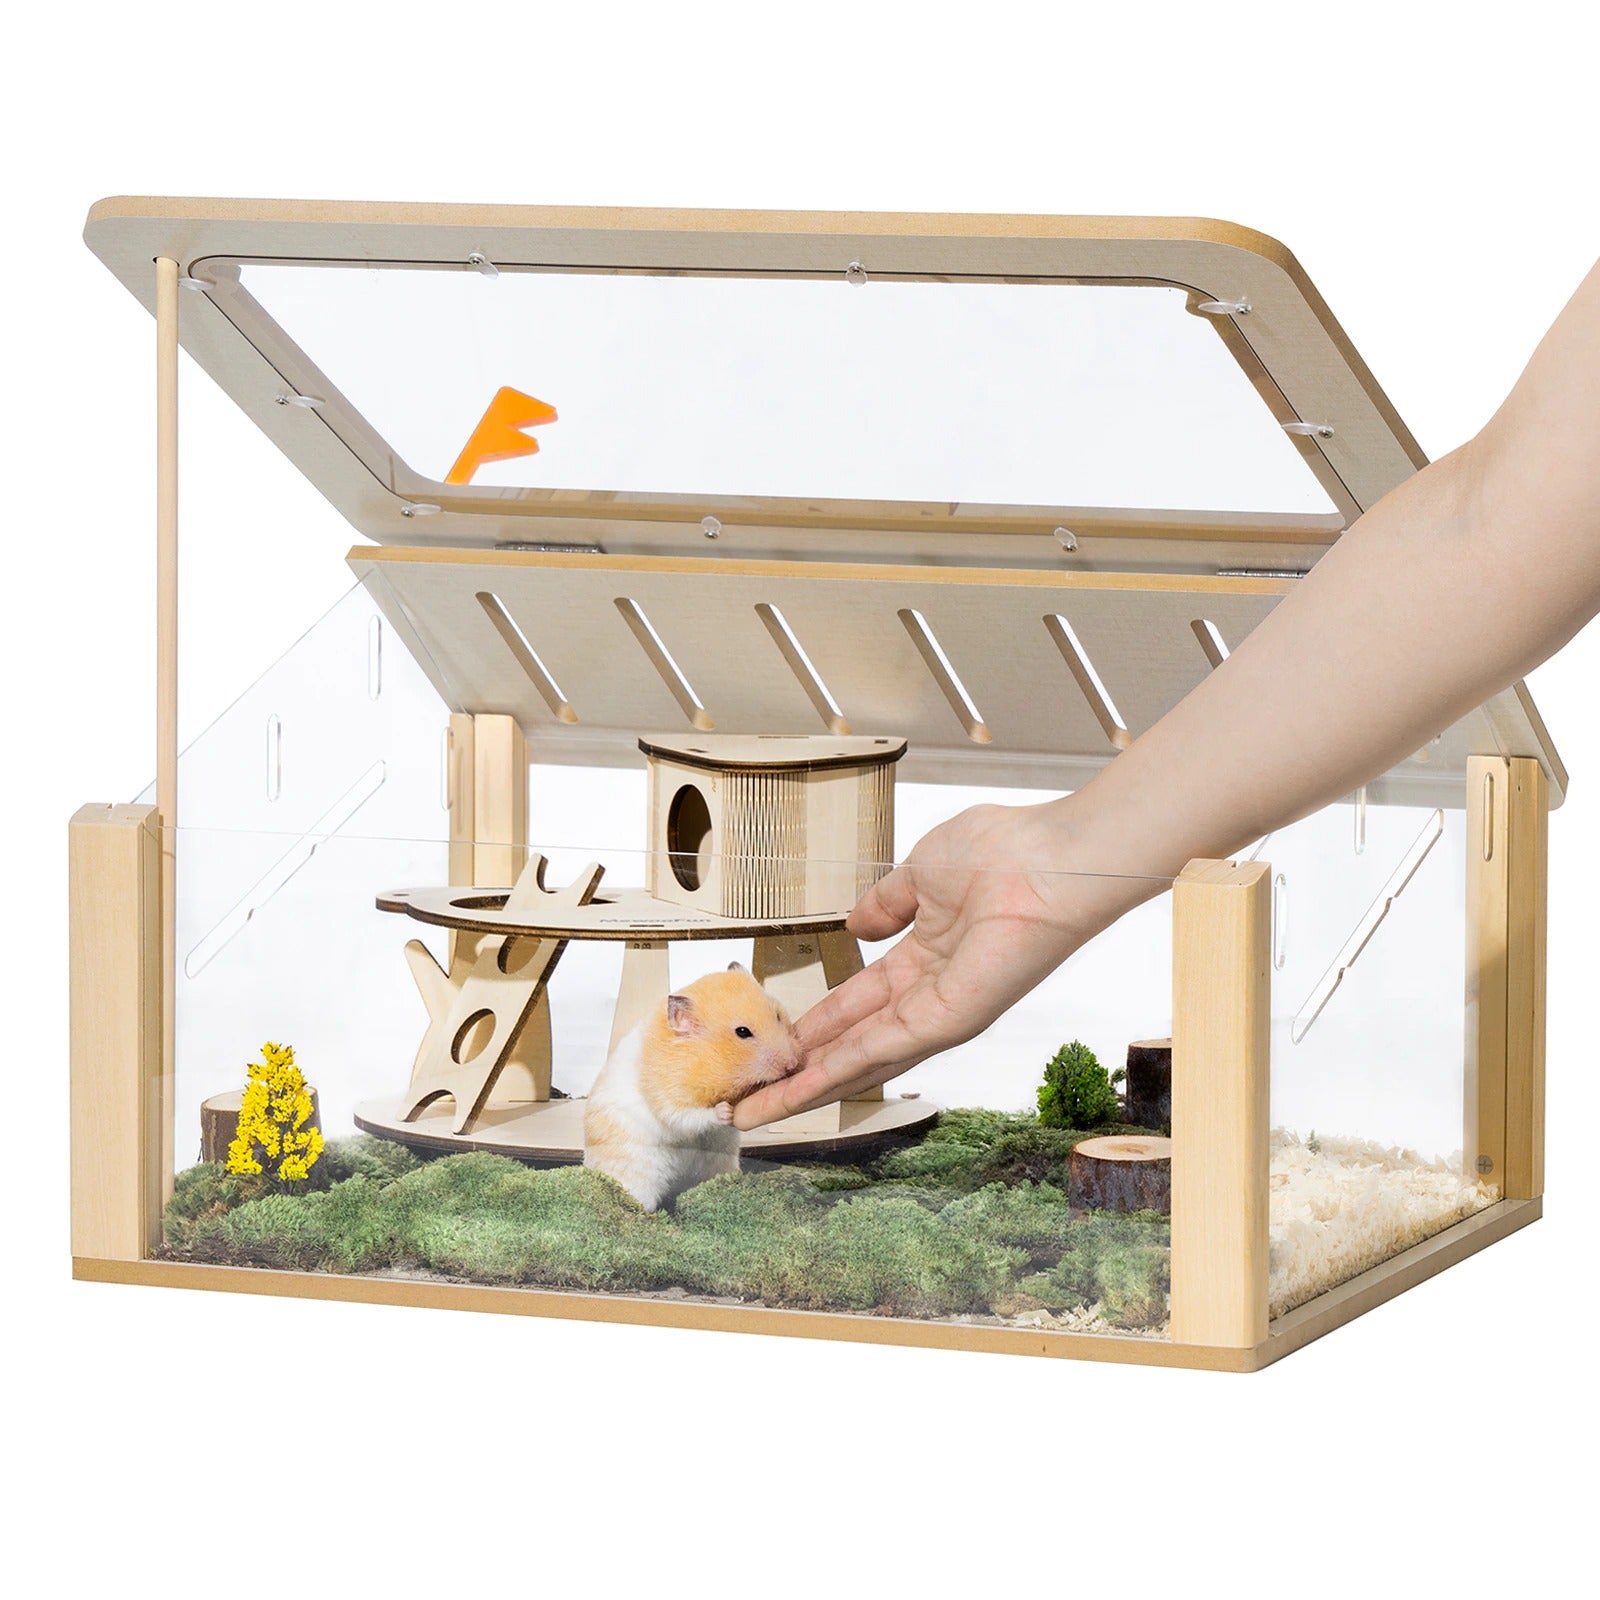 (Out of Stock) Wooden Hamster Cage Small Animal Acrylic Hamster Cage with House Pet Bed